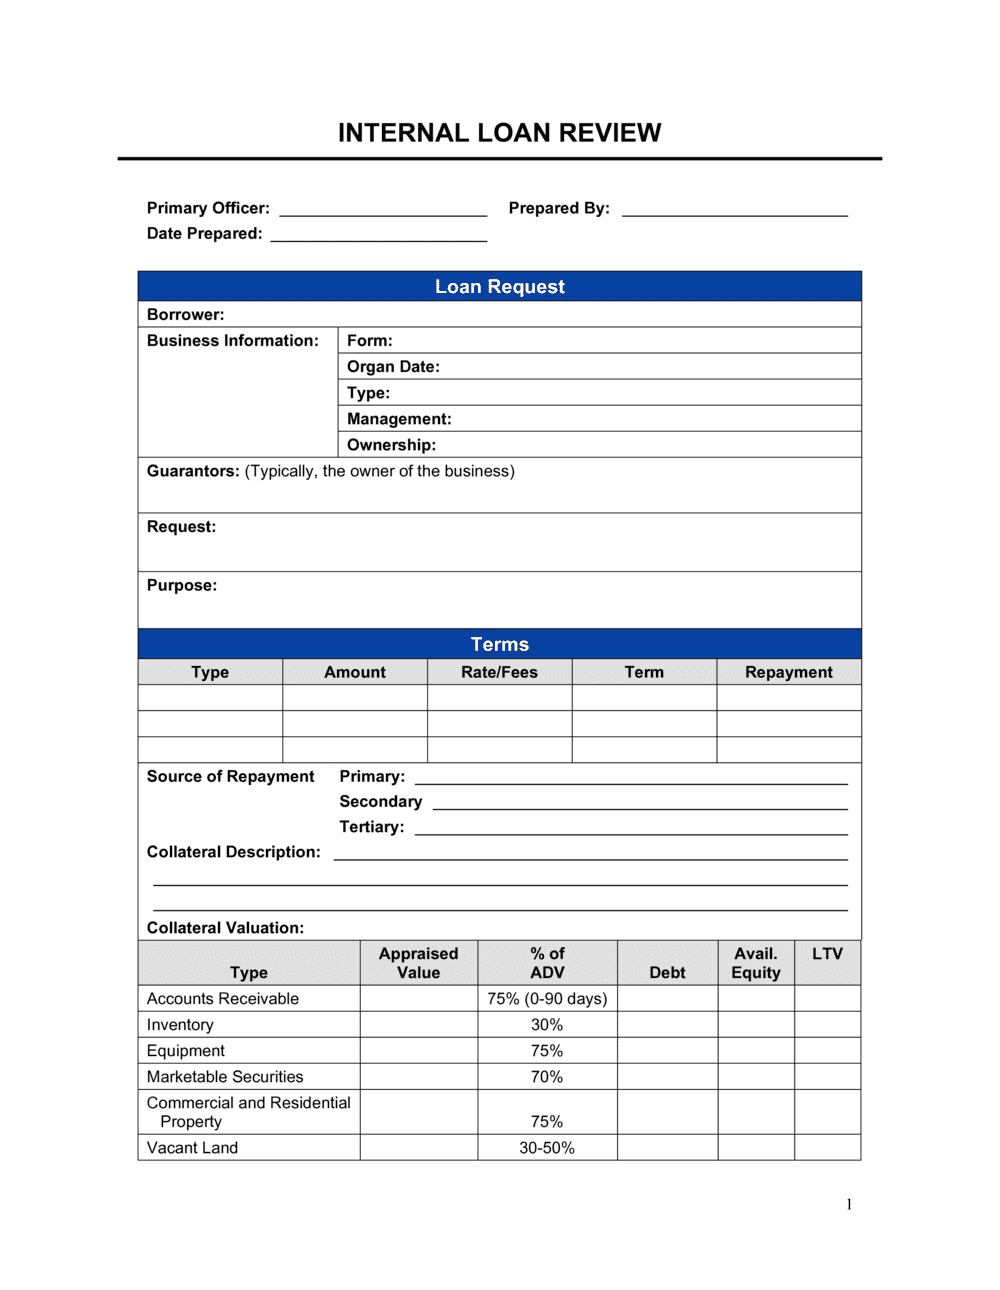 loan-application-review-form-template-by-business-in-a-box